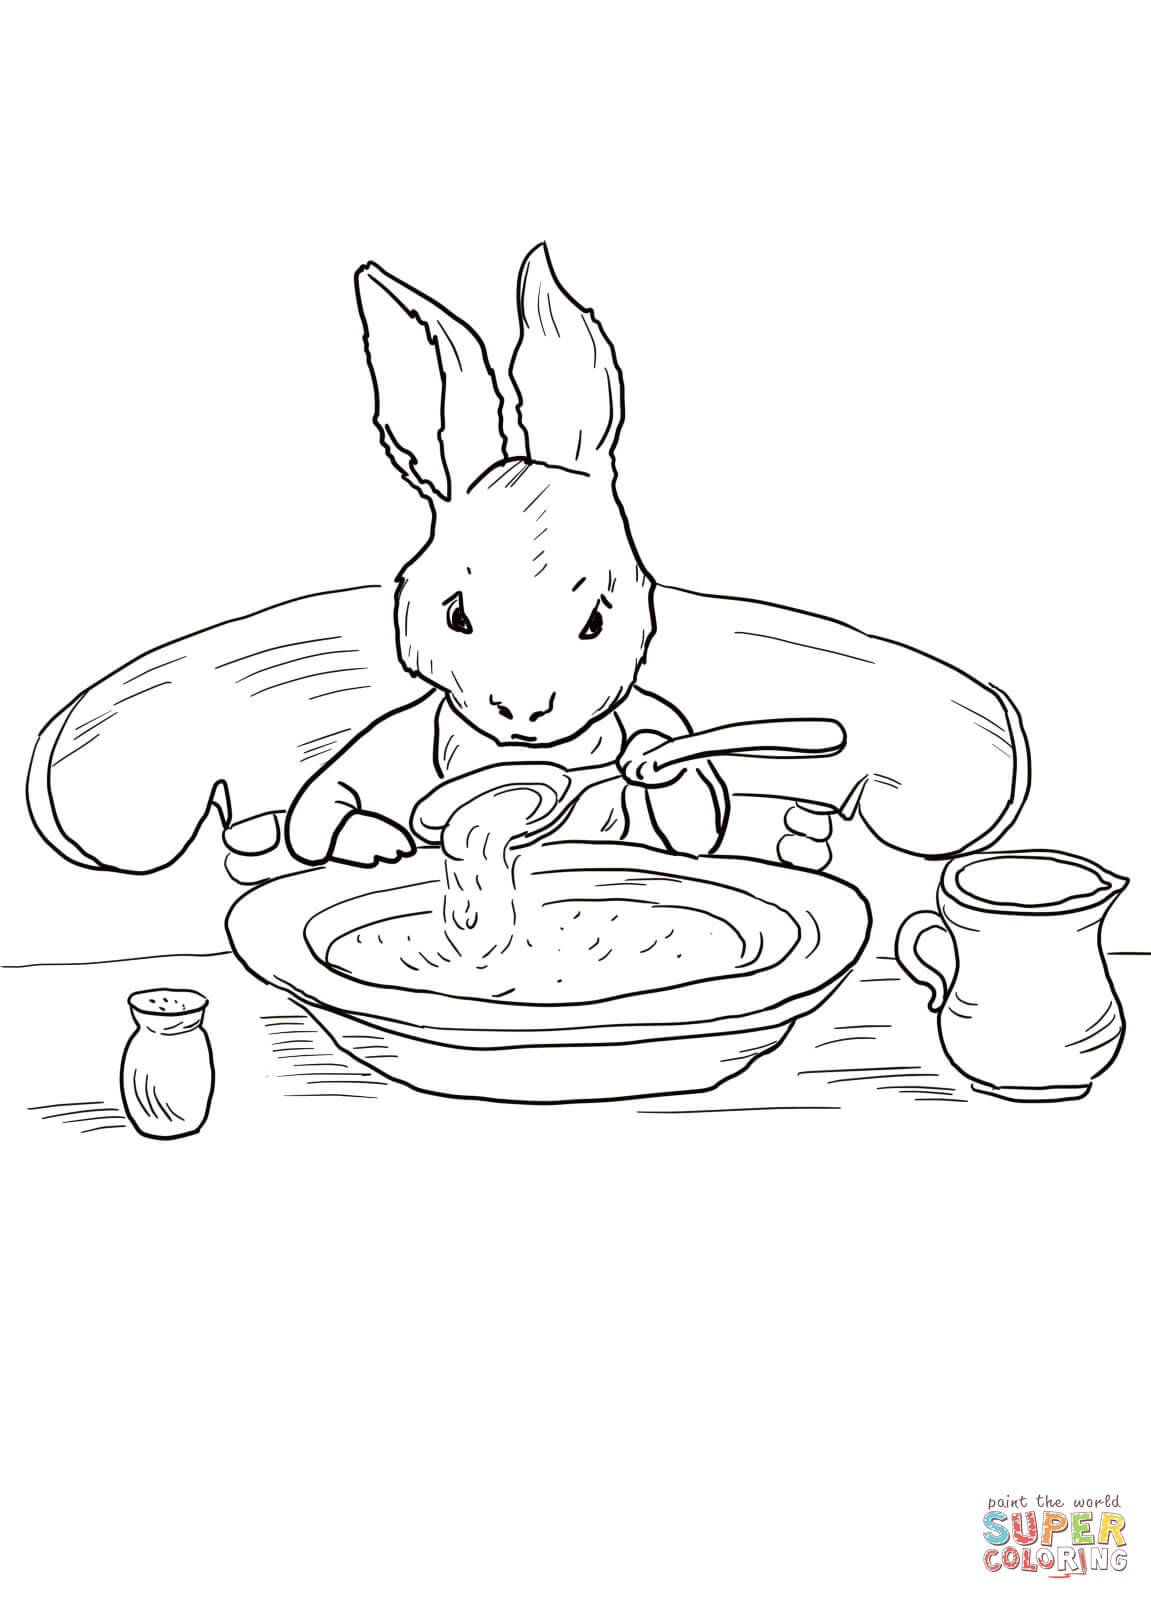 Peter Rabbit At Home Coloring Page | Free Printable Coloring Pages - Free Printable Peter Rabbit Coloring Pages